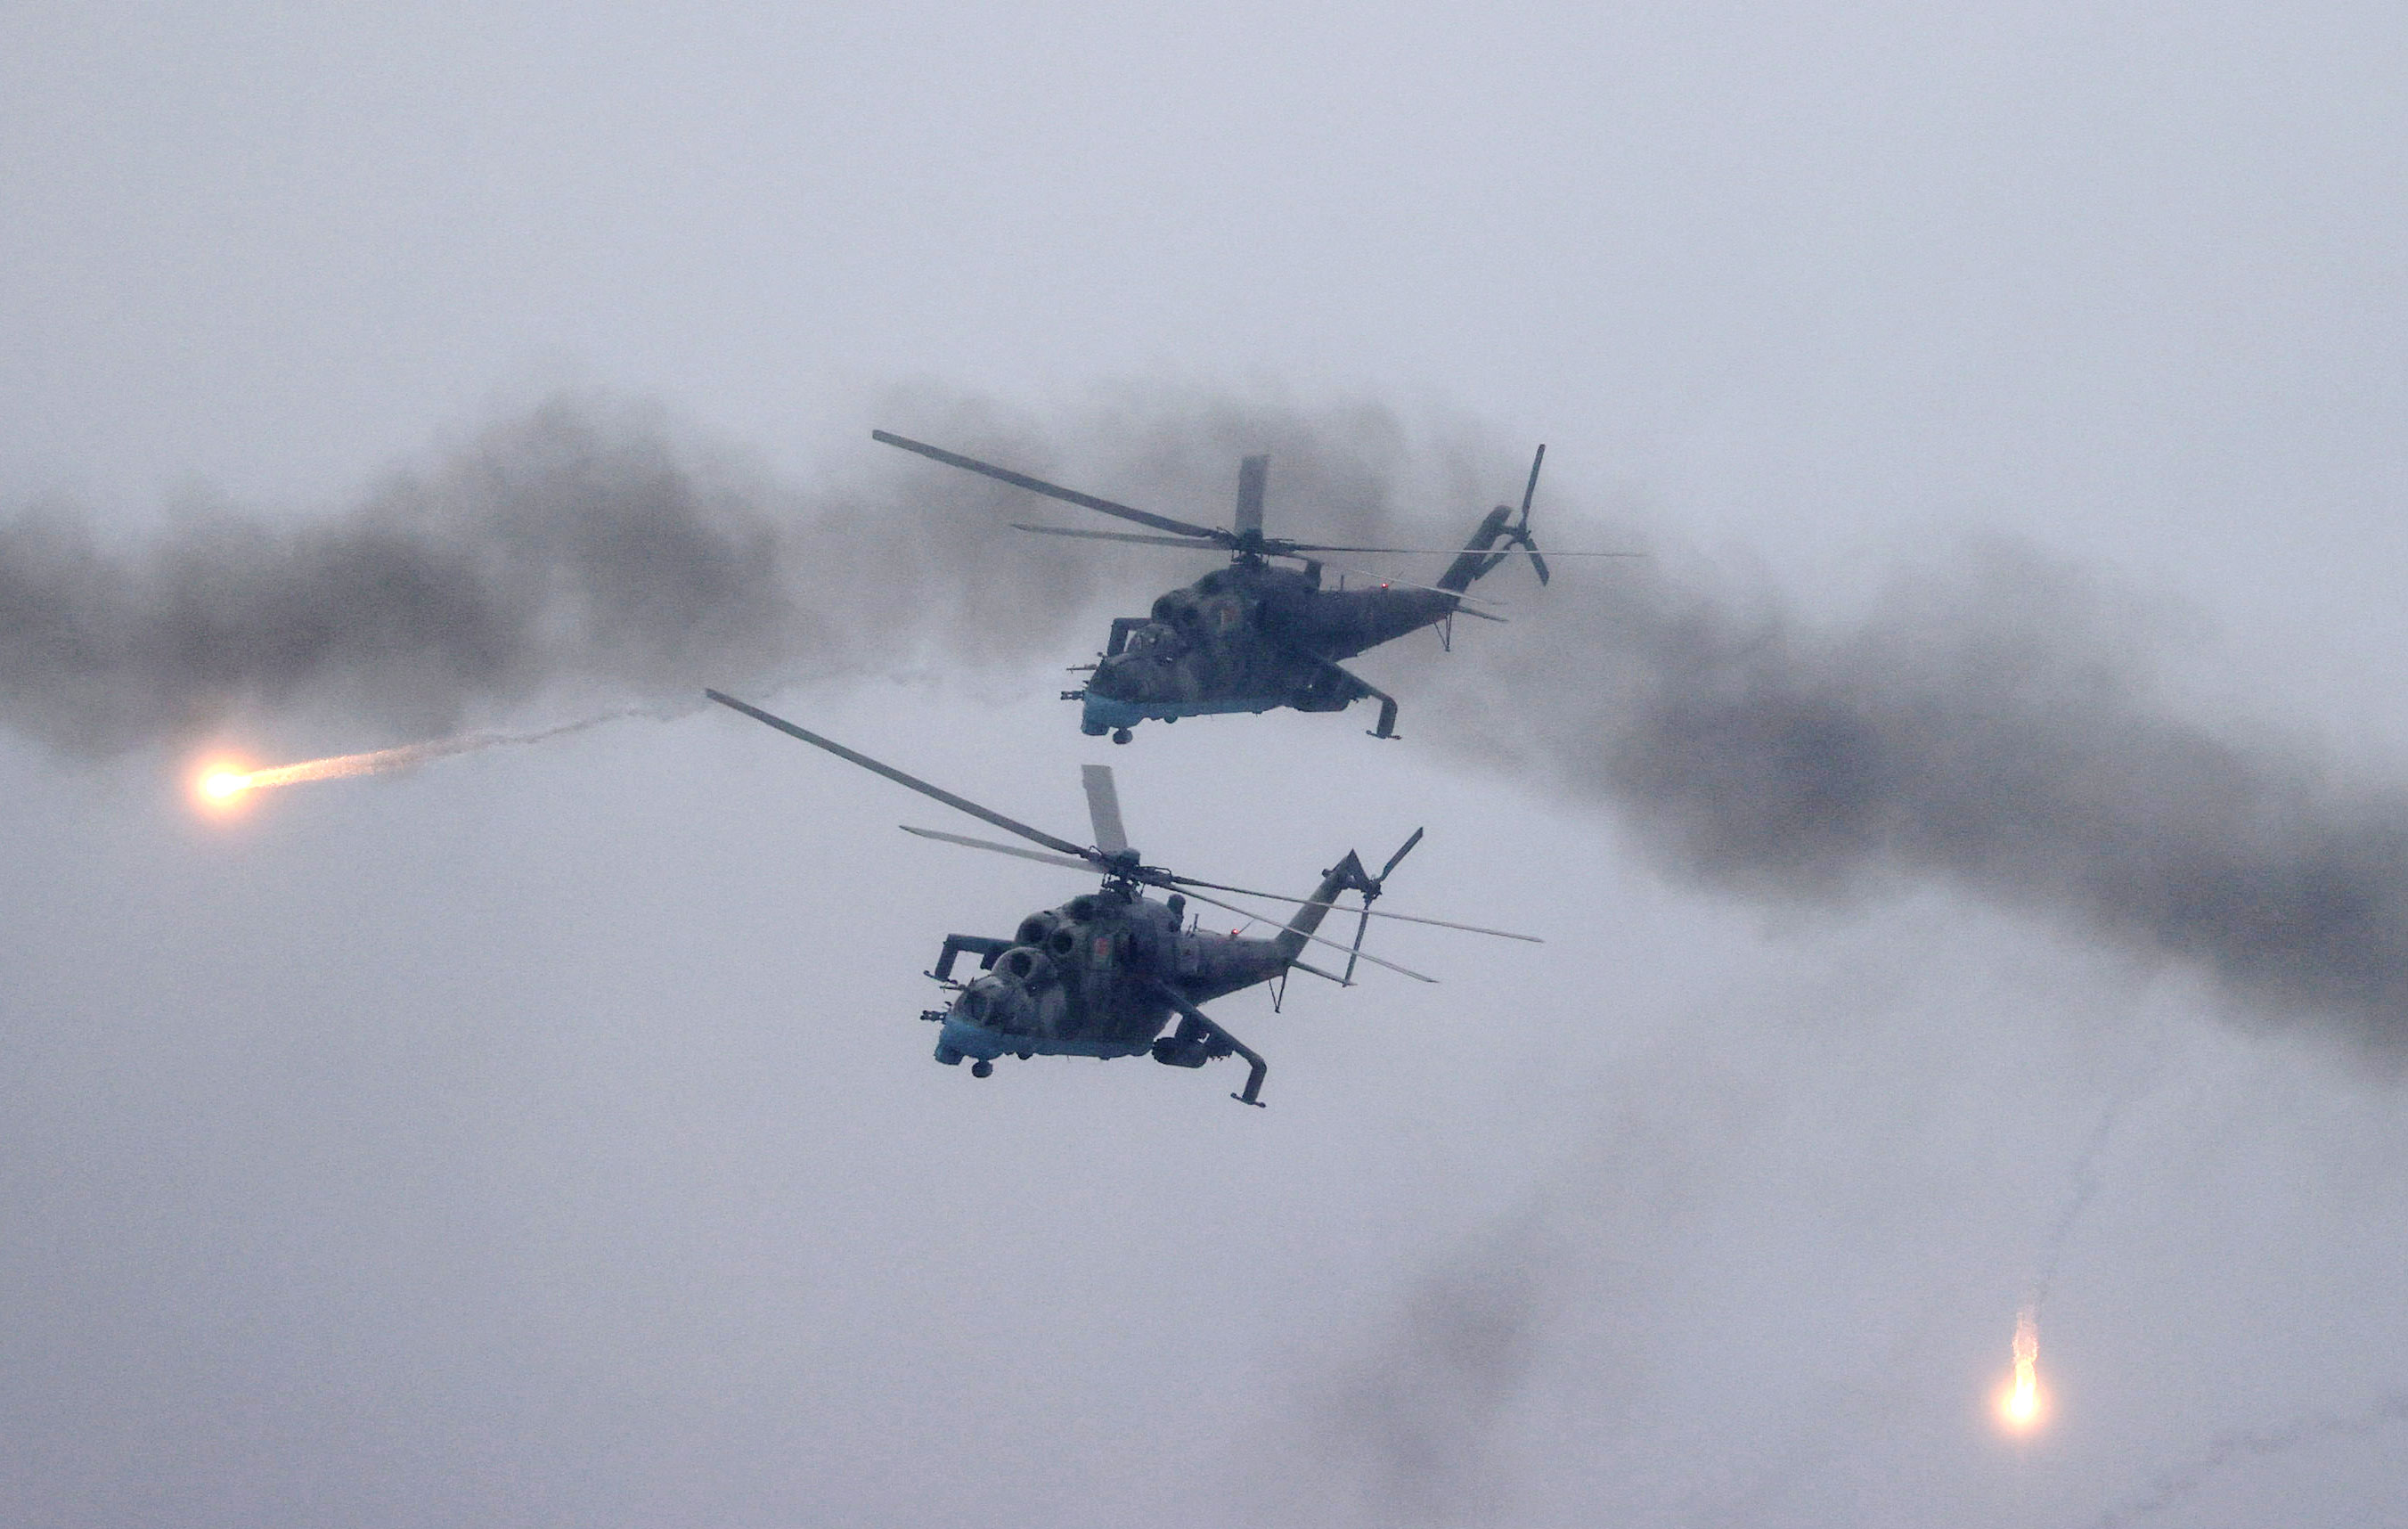 Belarusian Air Force Mi-24 helicopters fire during joint exercises of the armed forces of Russia and Belarus as part of an inspection of the Union State's Response Force on February 17, 2022. 